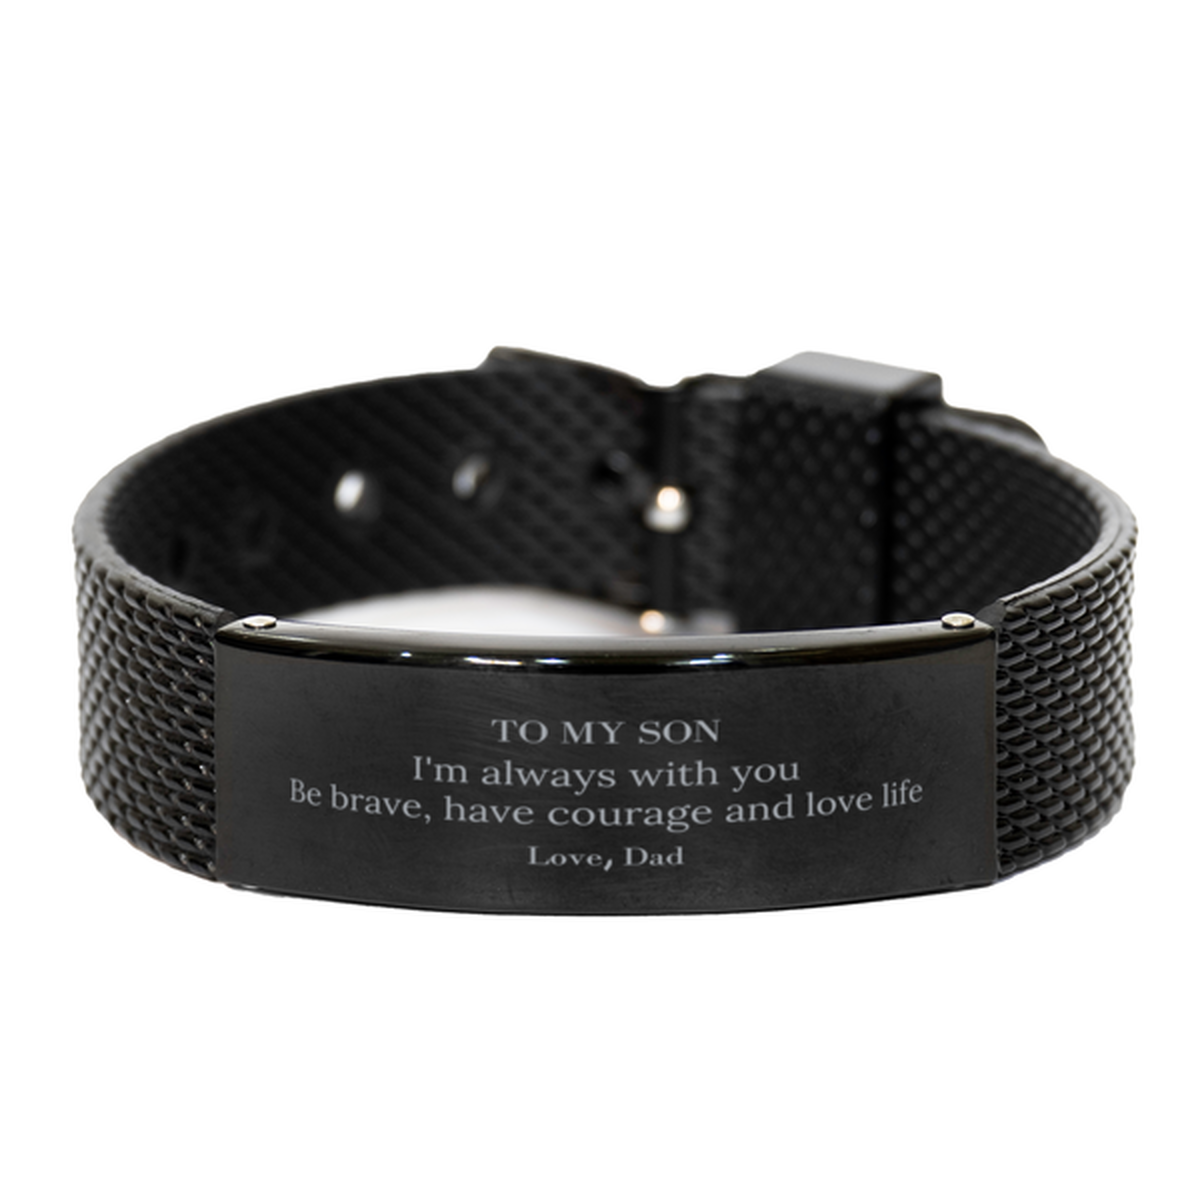 To My Son Gifts from Dad, Unique Black Shark Mesh Bracelet Inspirational Christmas Birthday Graduation Gifts for Son I'm always with you. Be brave, have courage and love life. Love, Dad